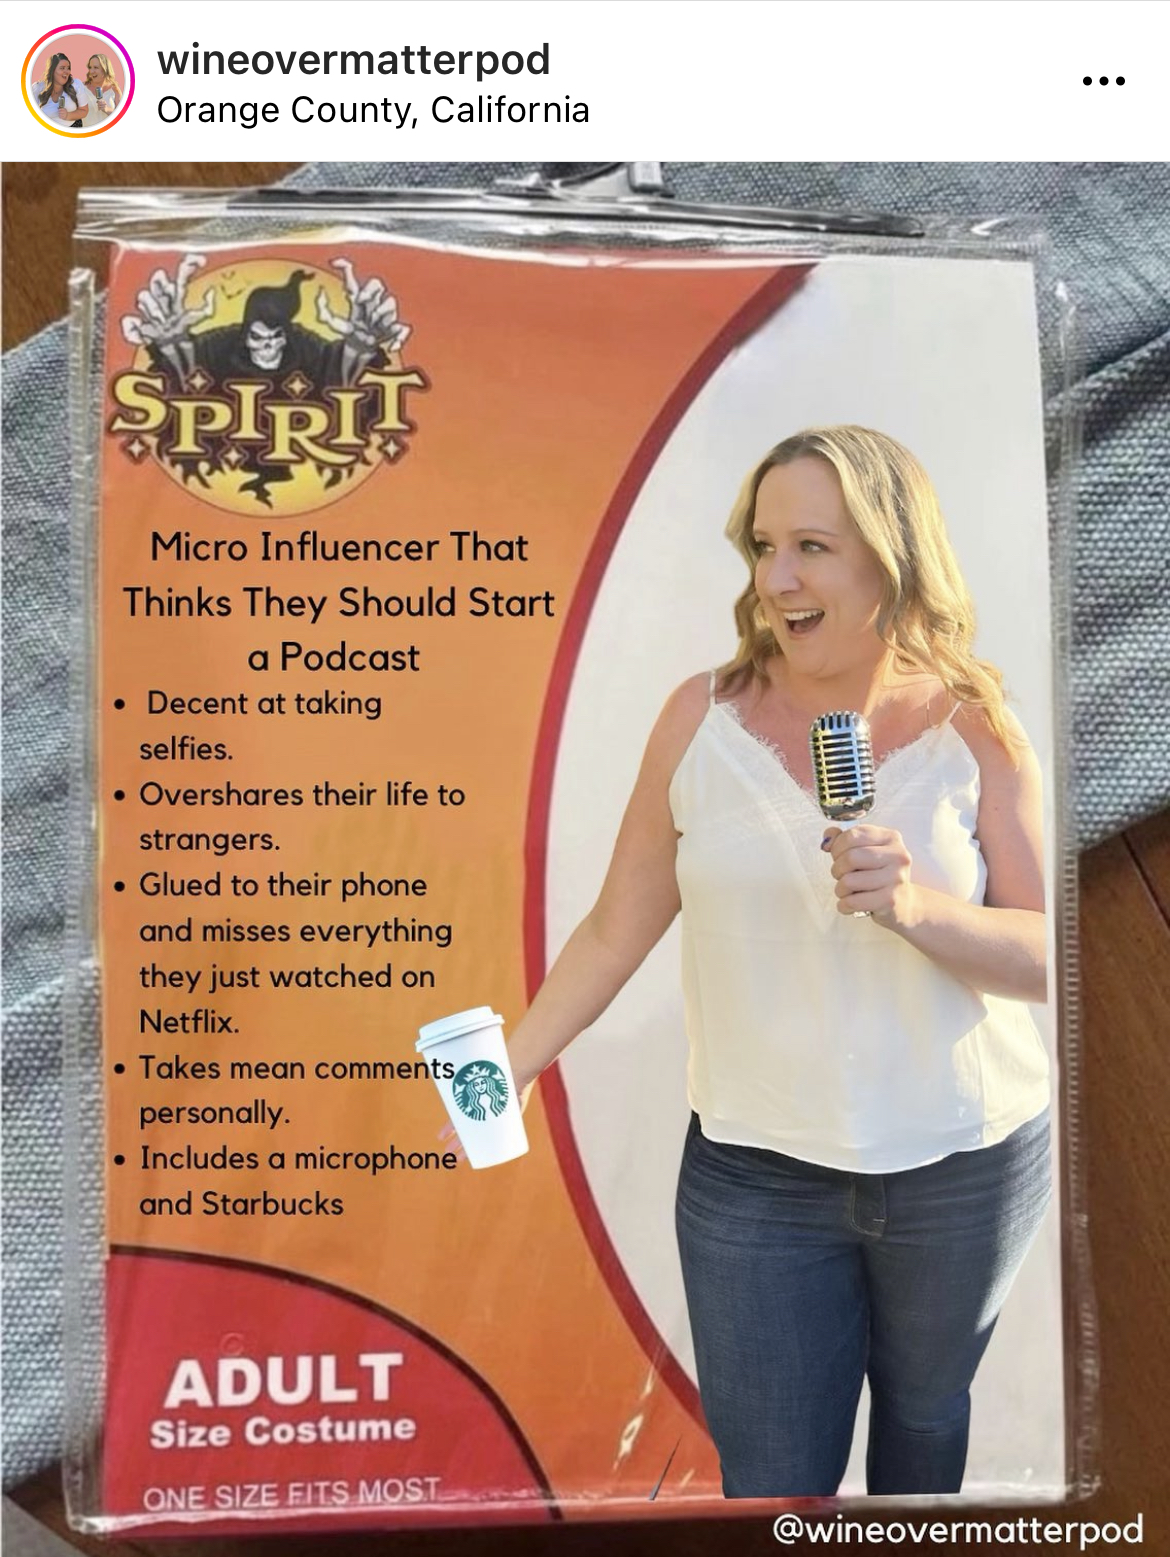 Costume Memes - spirit halloween - S wineovermatterpod Orange County, California. Spirit! Micro Influencer That Thinks They Should Start a Podcast Decent at taking selfies. Over their life to strangers. .Glued to their phone and misses everything they jus